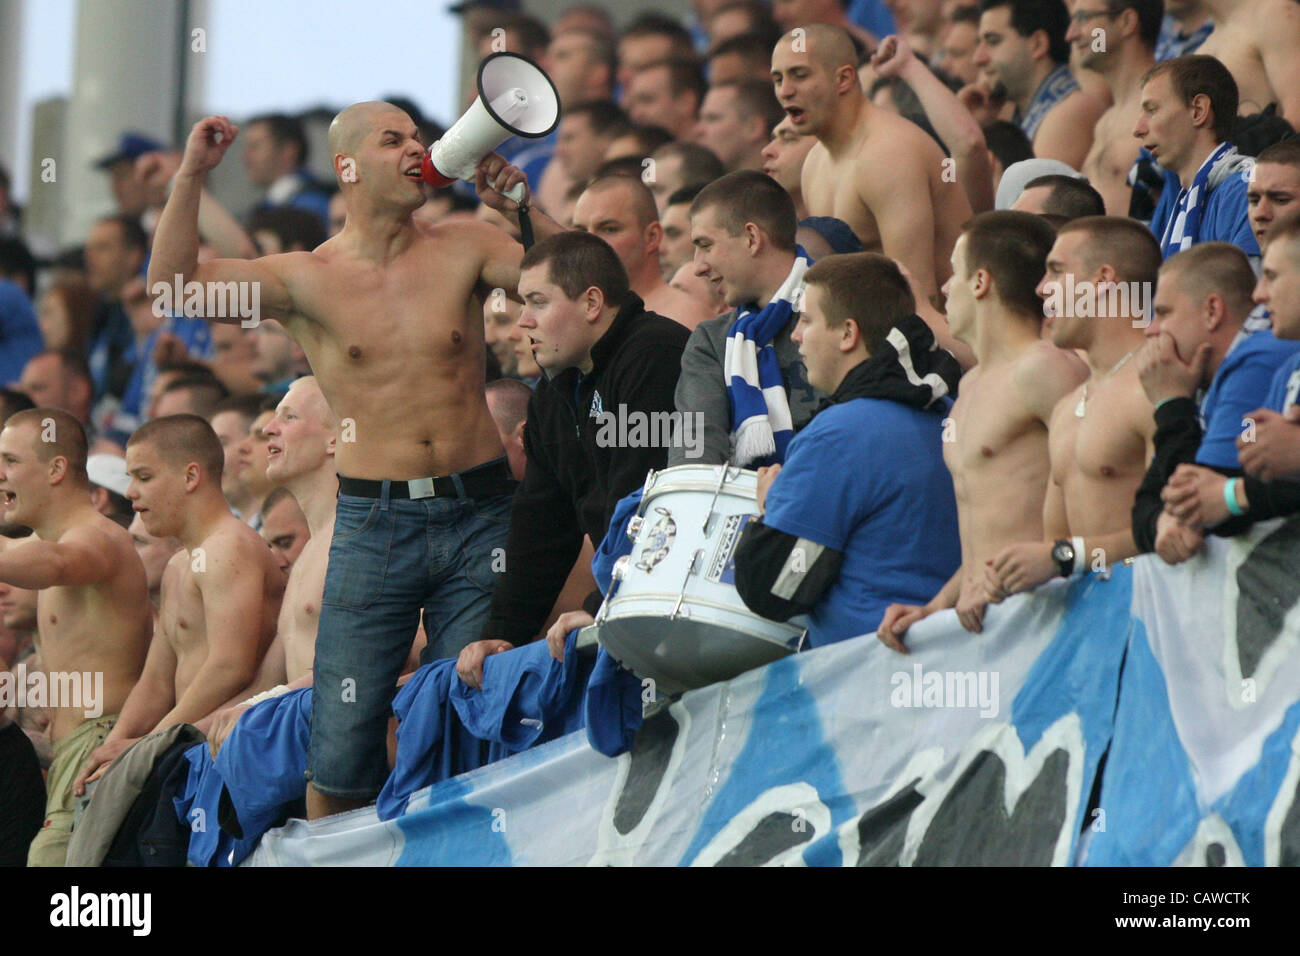 24.04.2012 Kielce, Poland. Legia Warsaw v Ruch Chorzow The Polish Cup Final  from the Kielc Arena. Picture shows trouble amongst the crowd Stock Photo -  Alamy